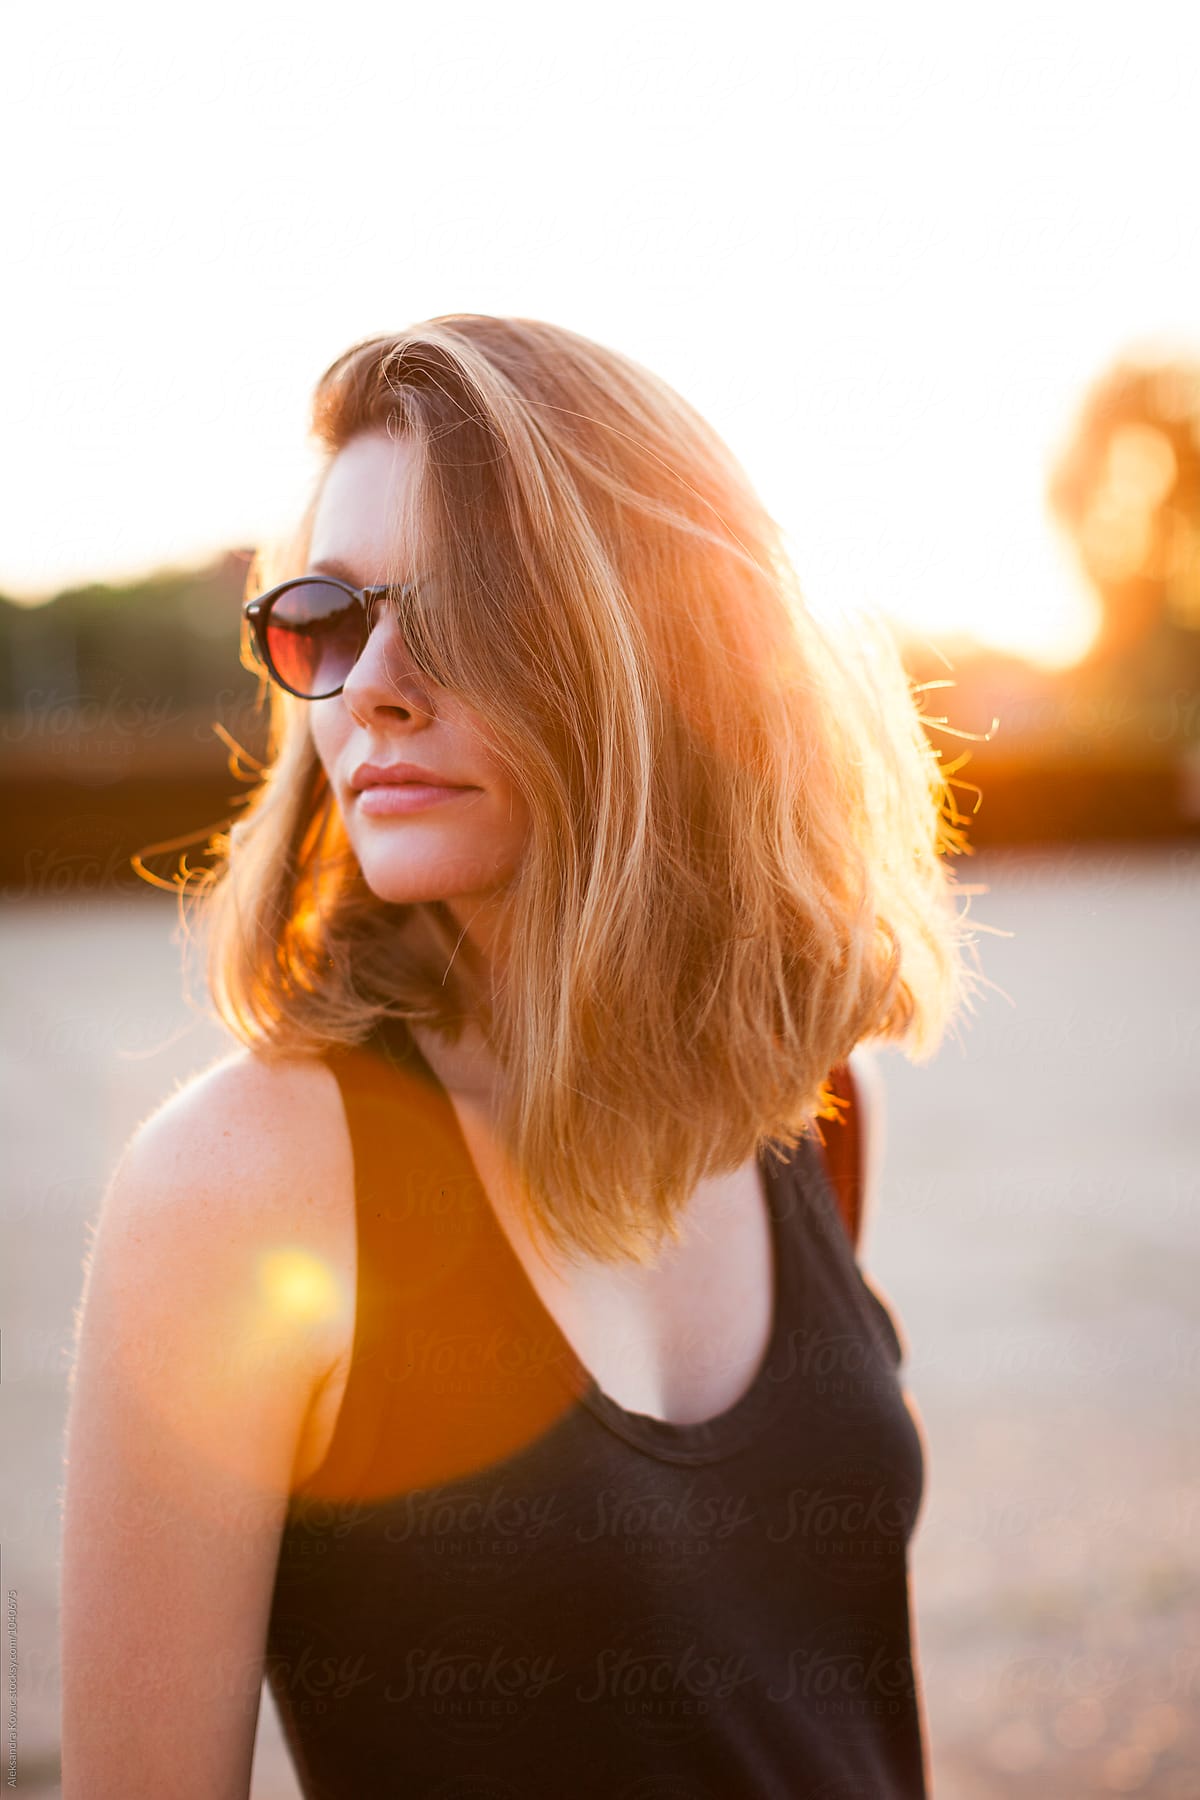 Woman With Casual Hair And Sunglasses On A Sunny Day By Stocksy